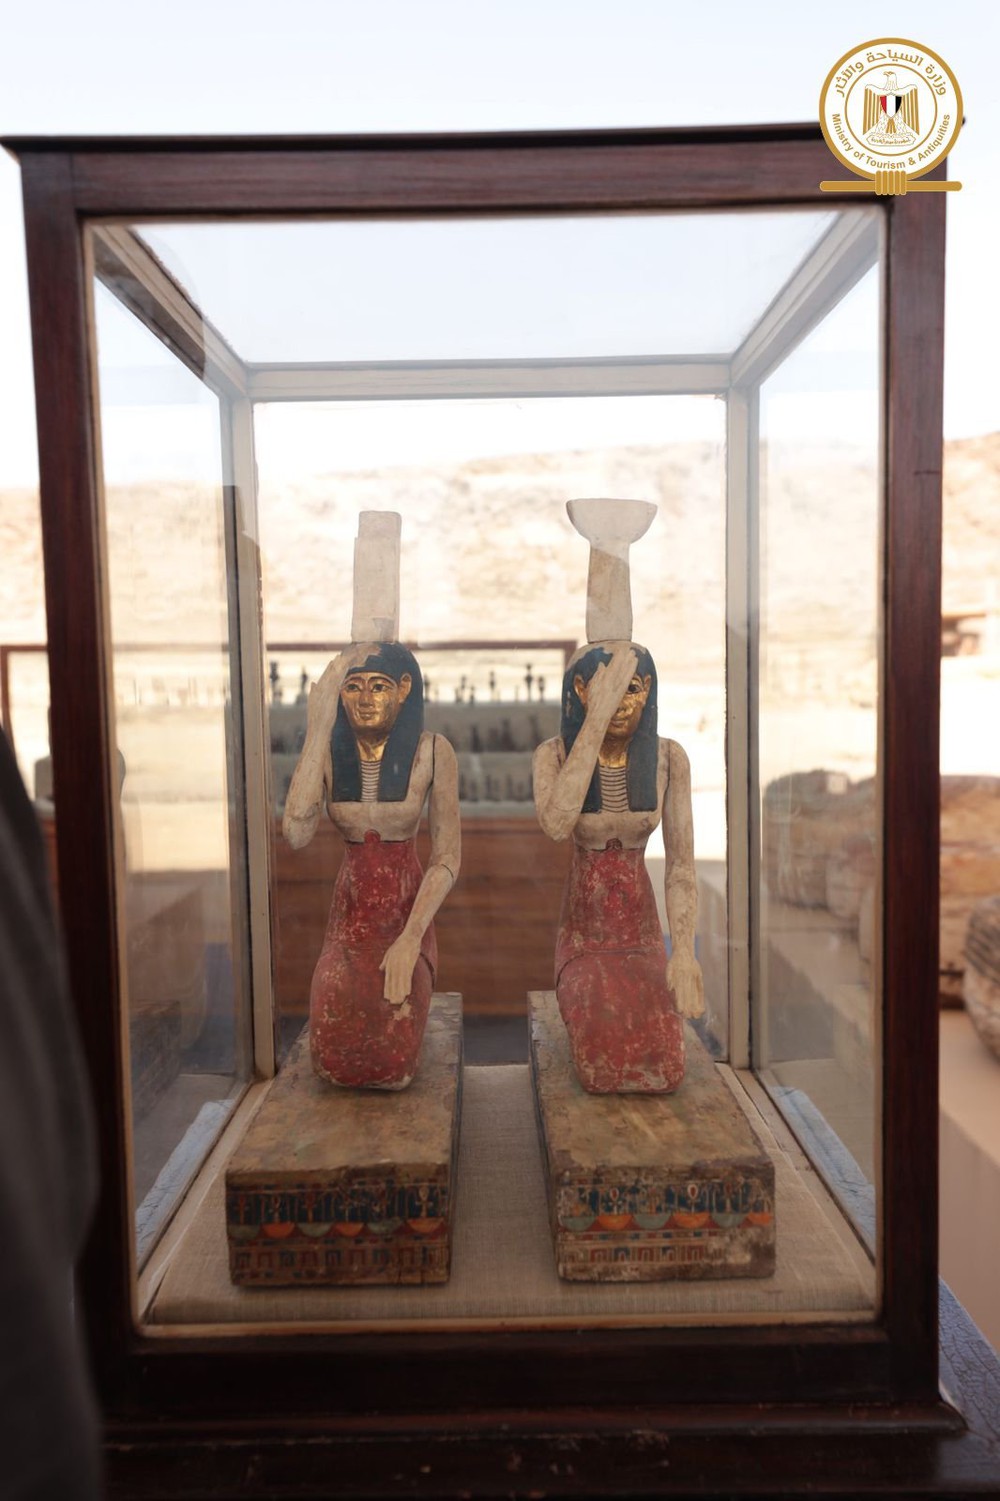 Discovered hundreds of coffins containing 2,500-year-old Egyptian mummies - Photo 6.